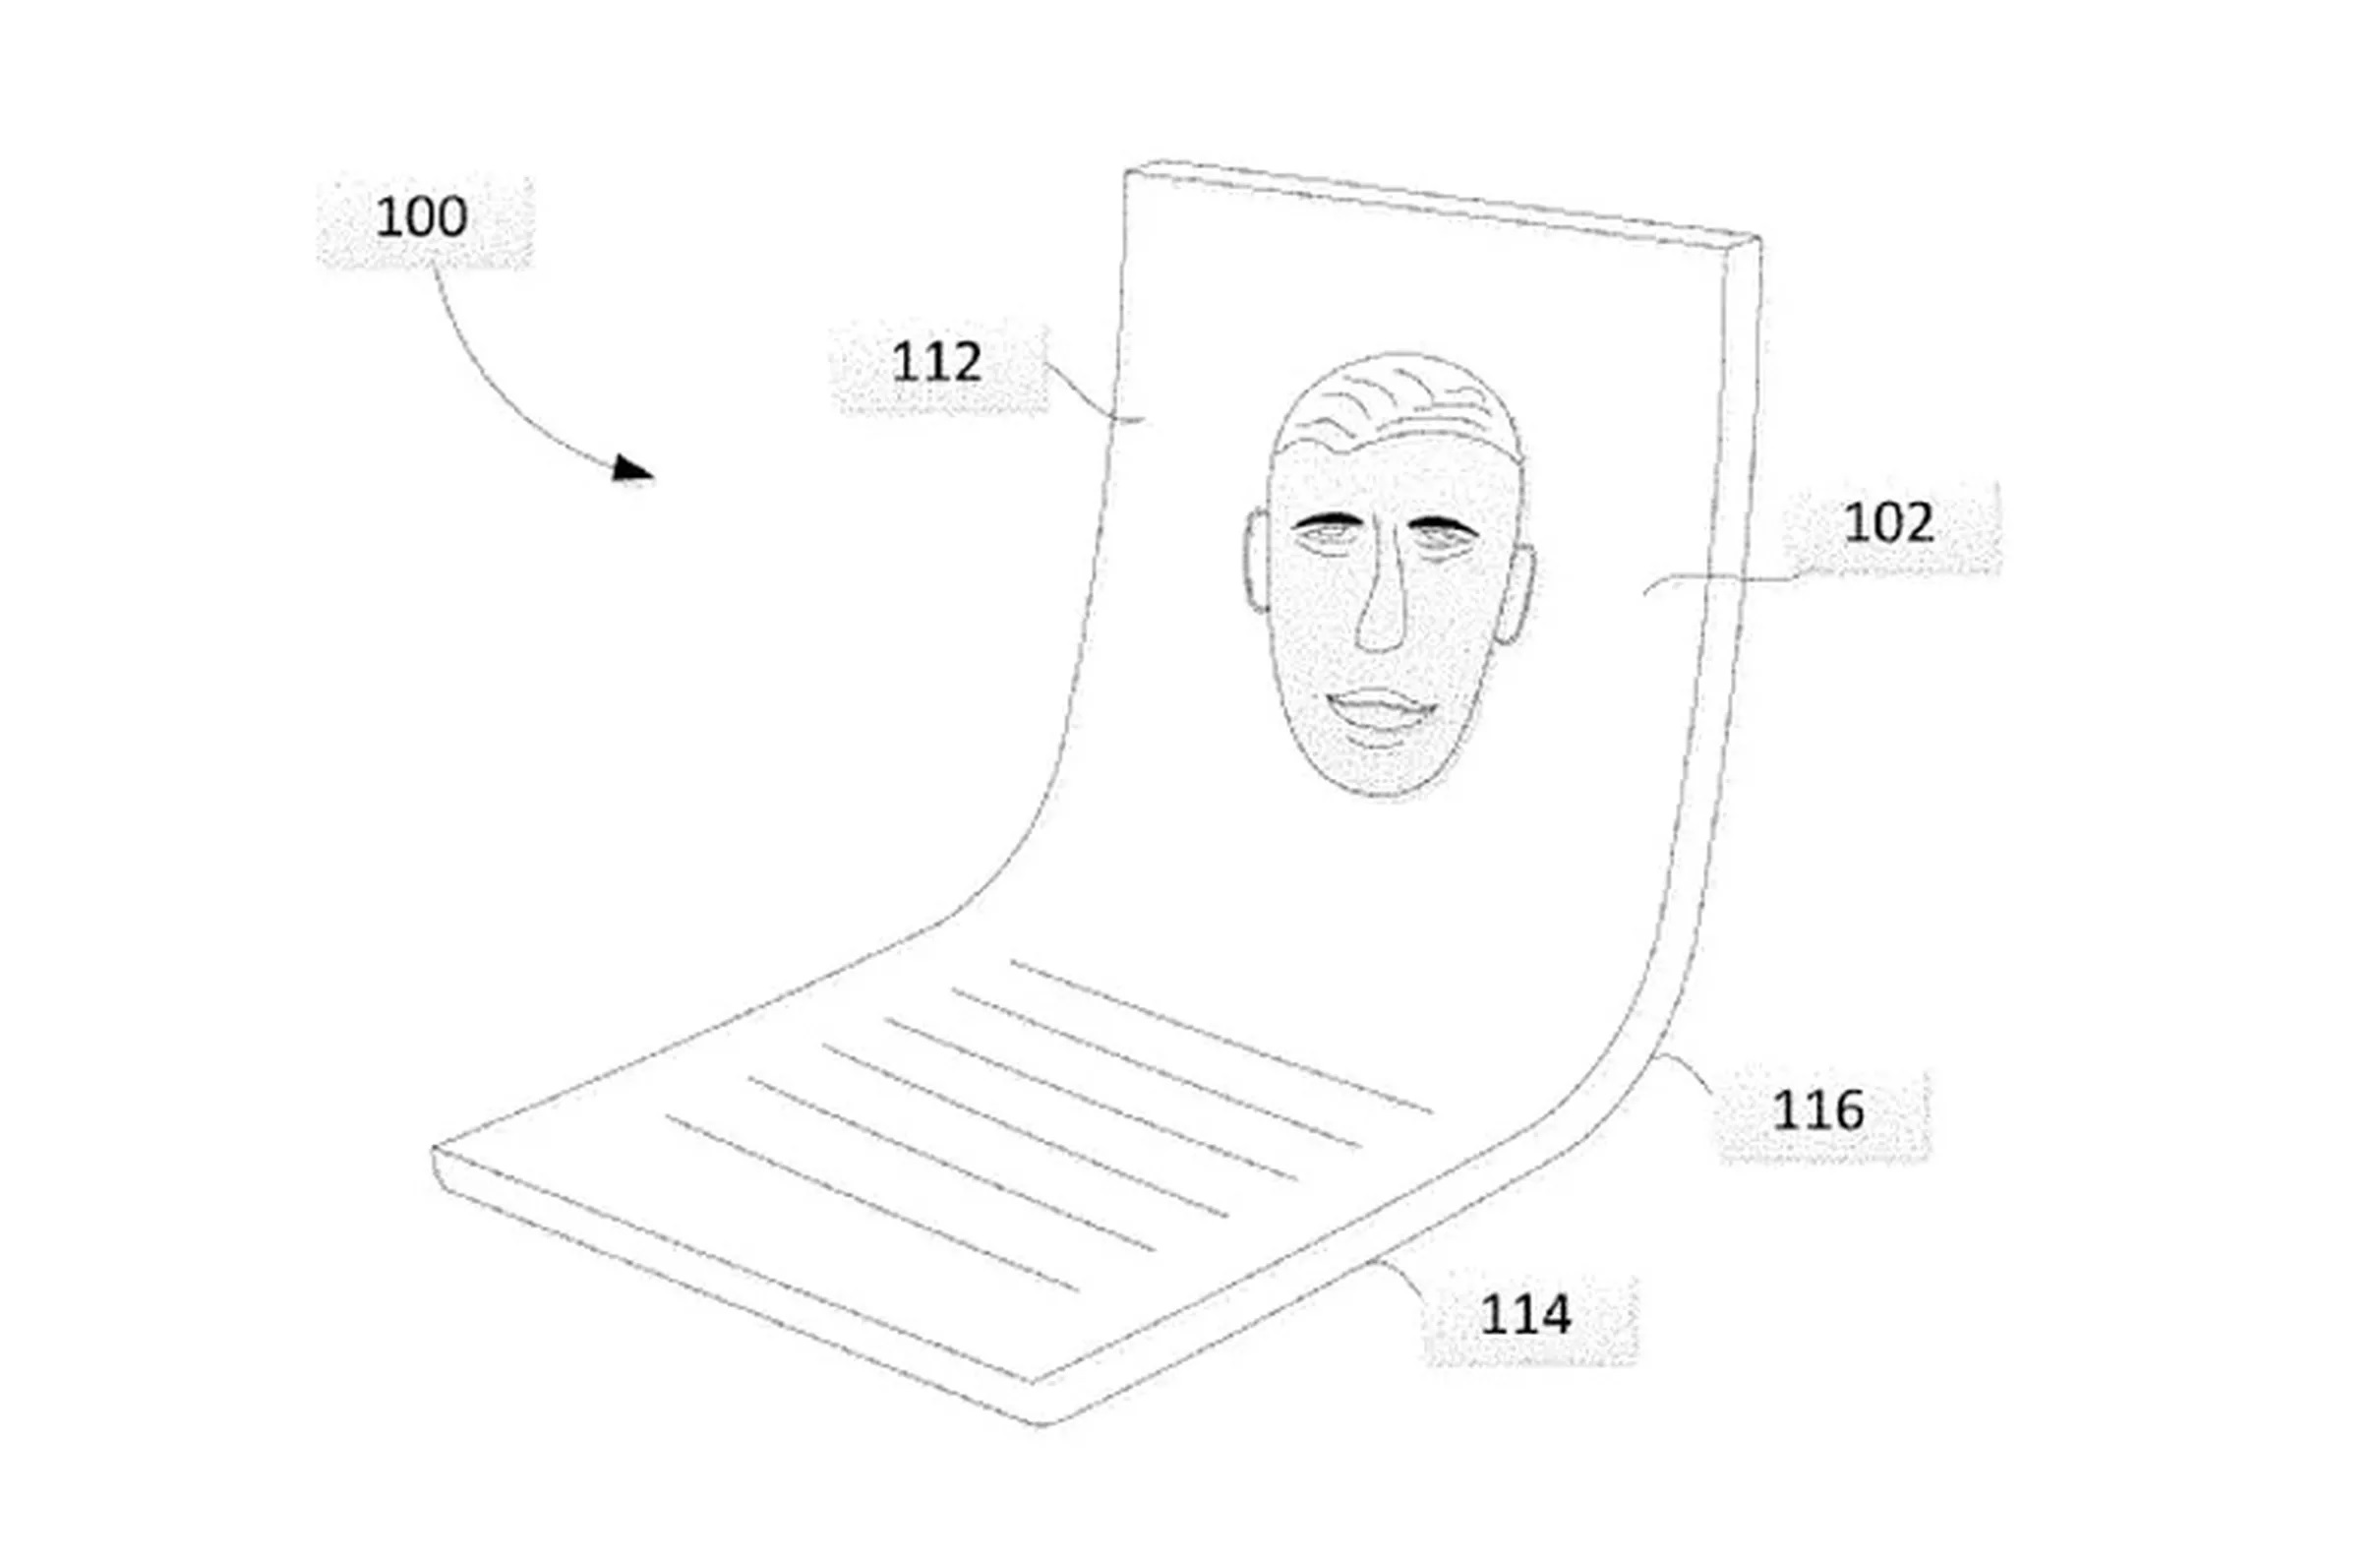 A Google folding device patent showing an upright, folding phone with a drawing of a face on the display.